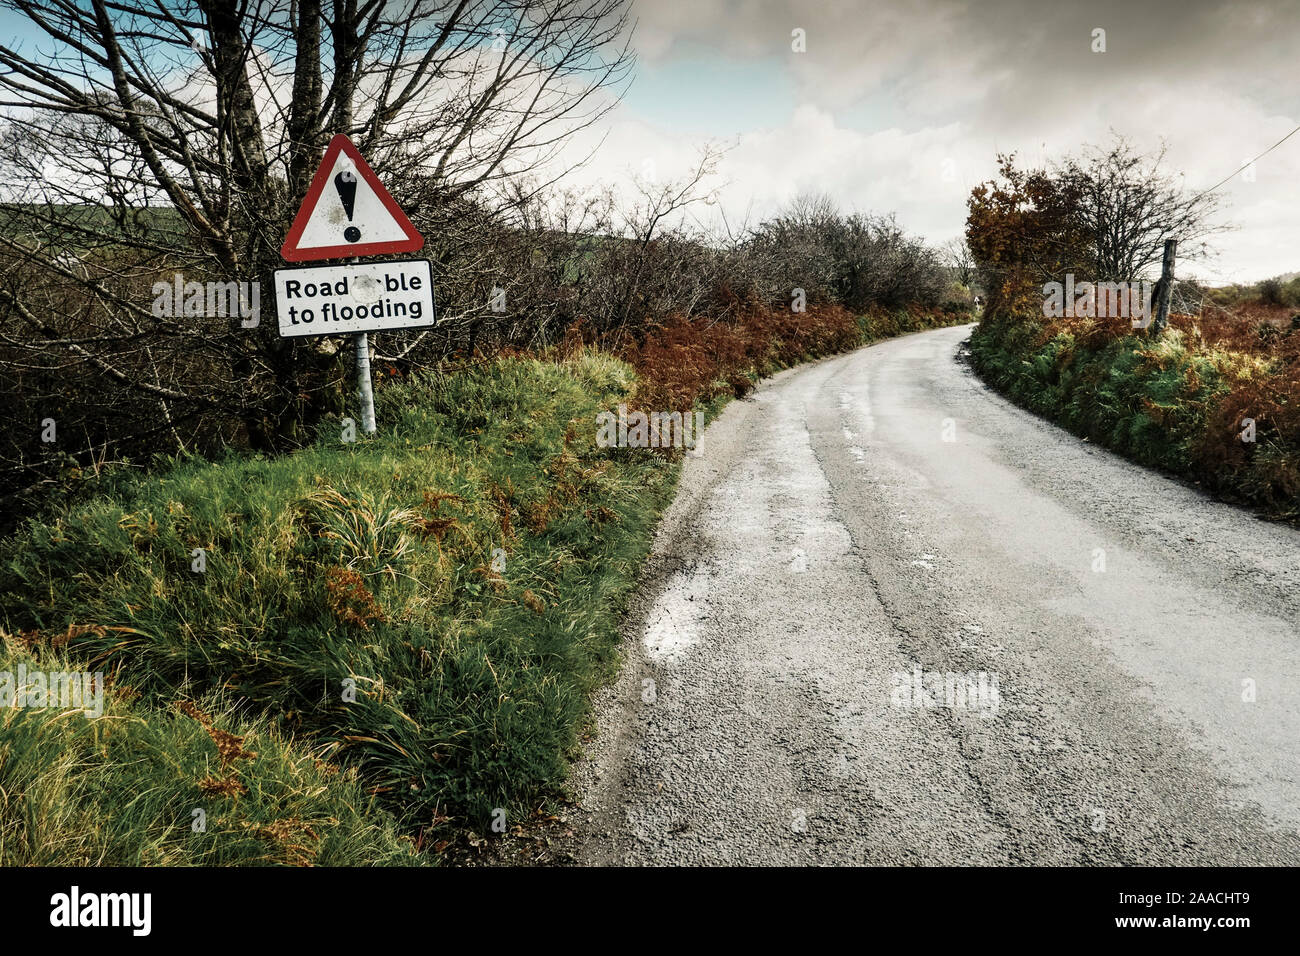 A warning traffic sign on a rural road in Cornwall. Stock Photo